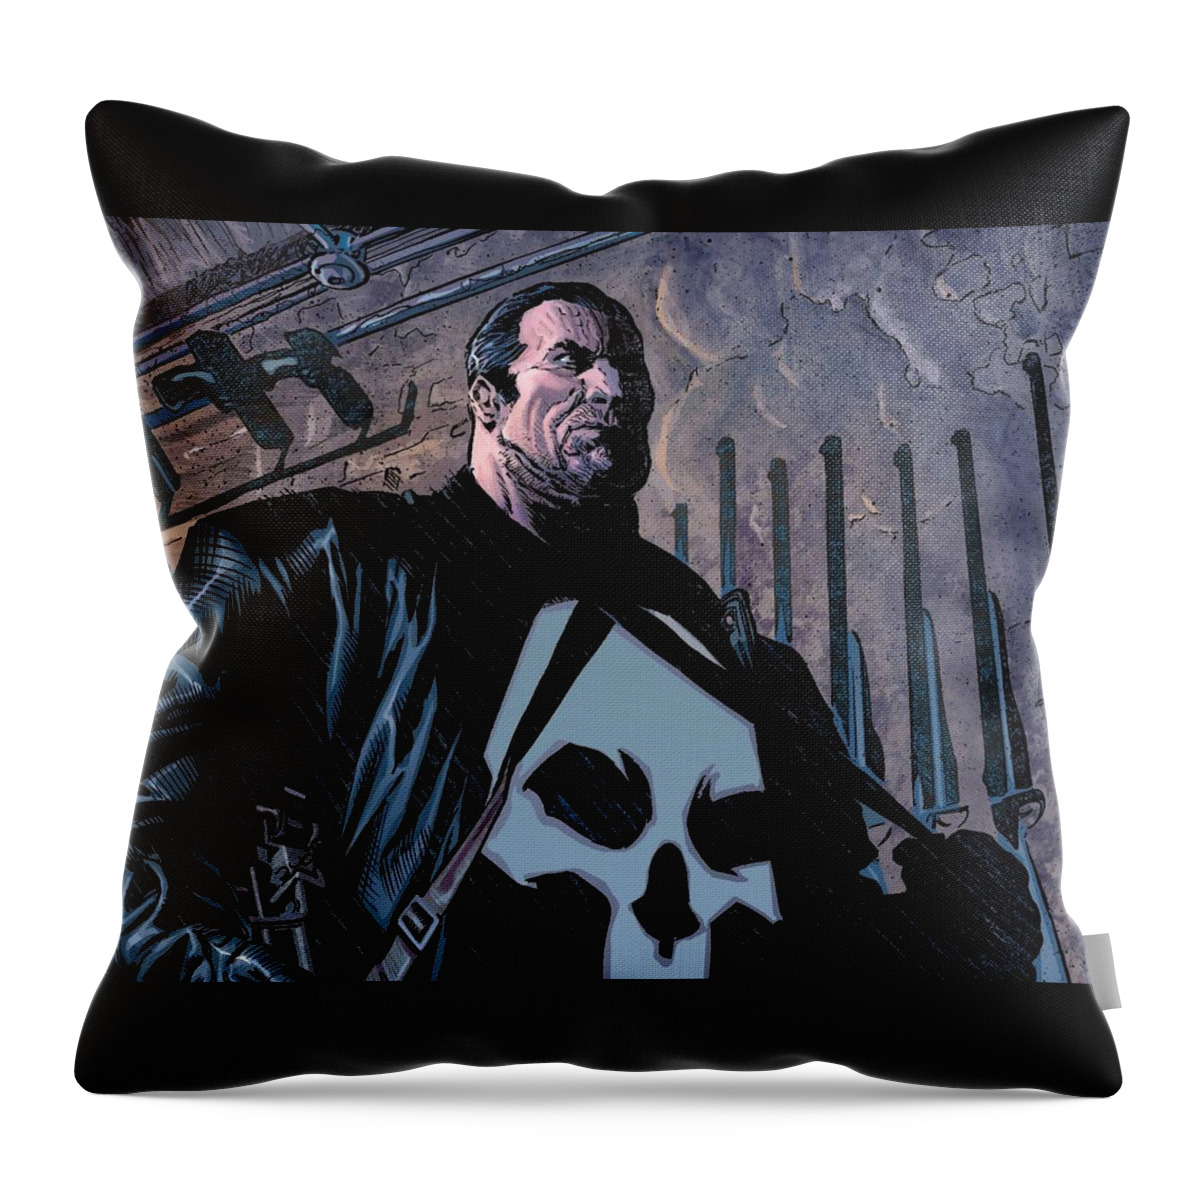 Punisher Throw Pillow featuring the digital art Punisher #5 by Super Lovely